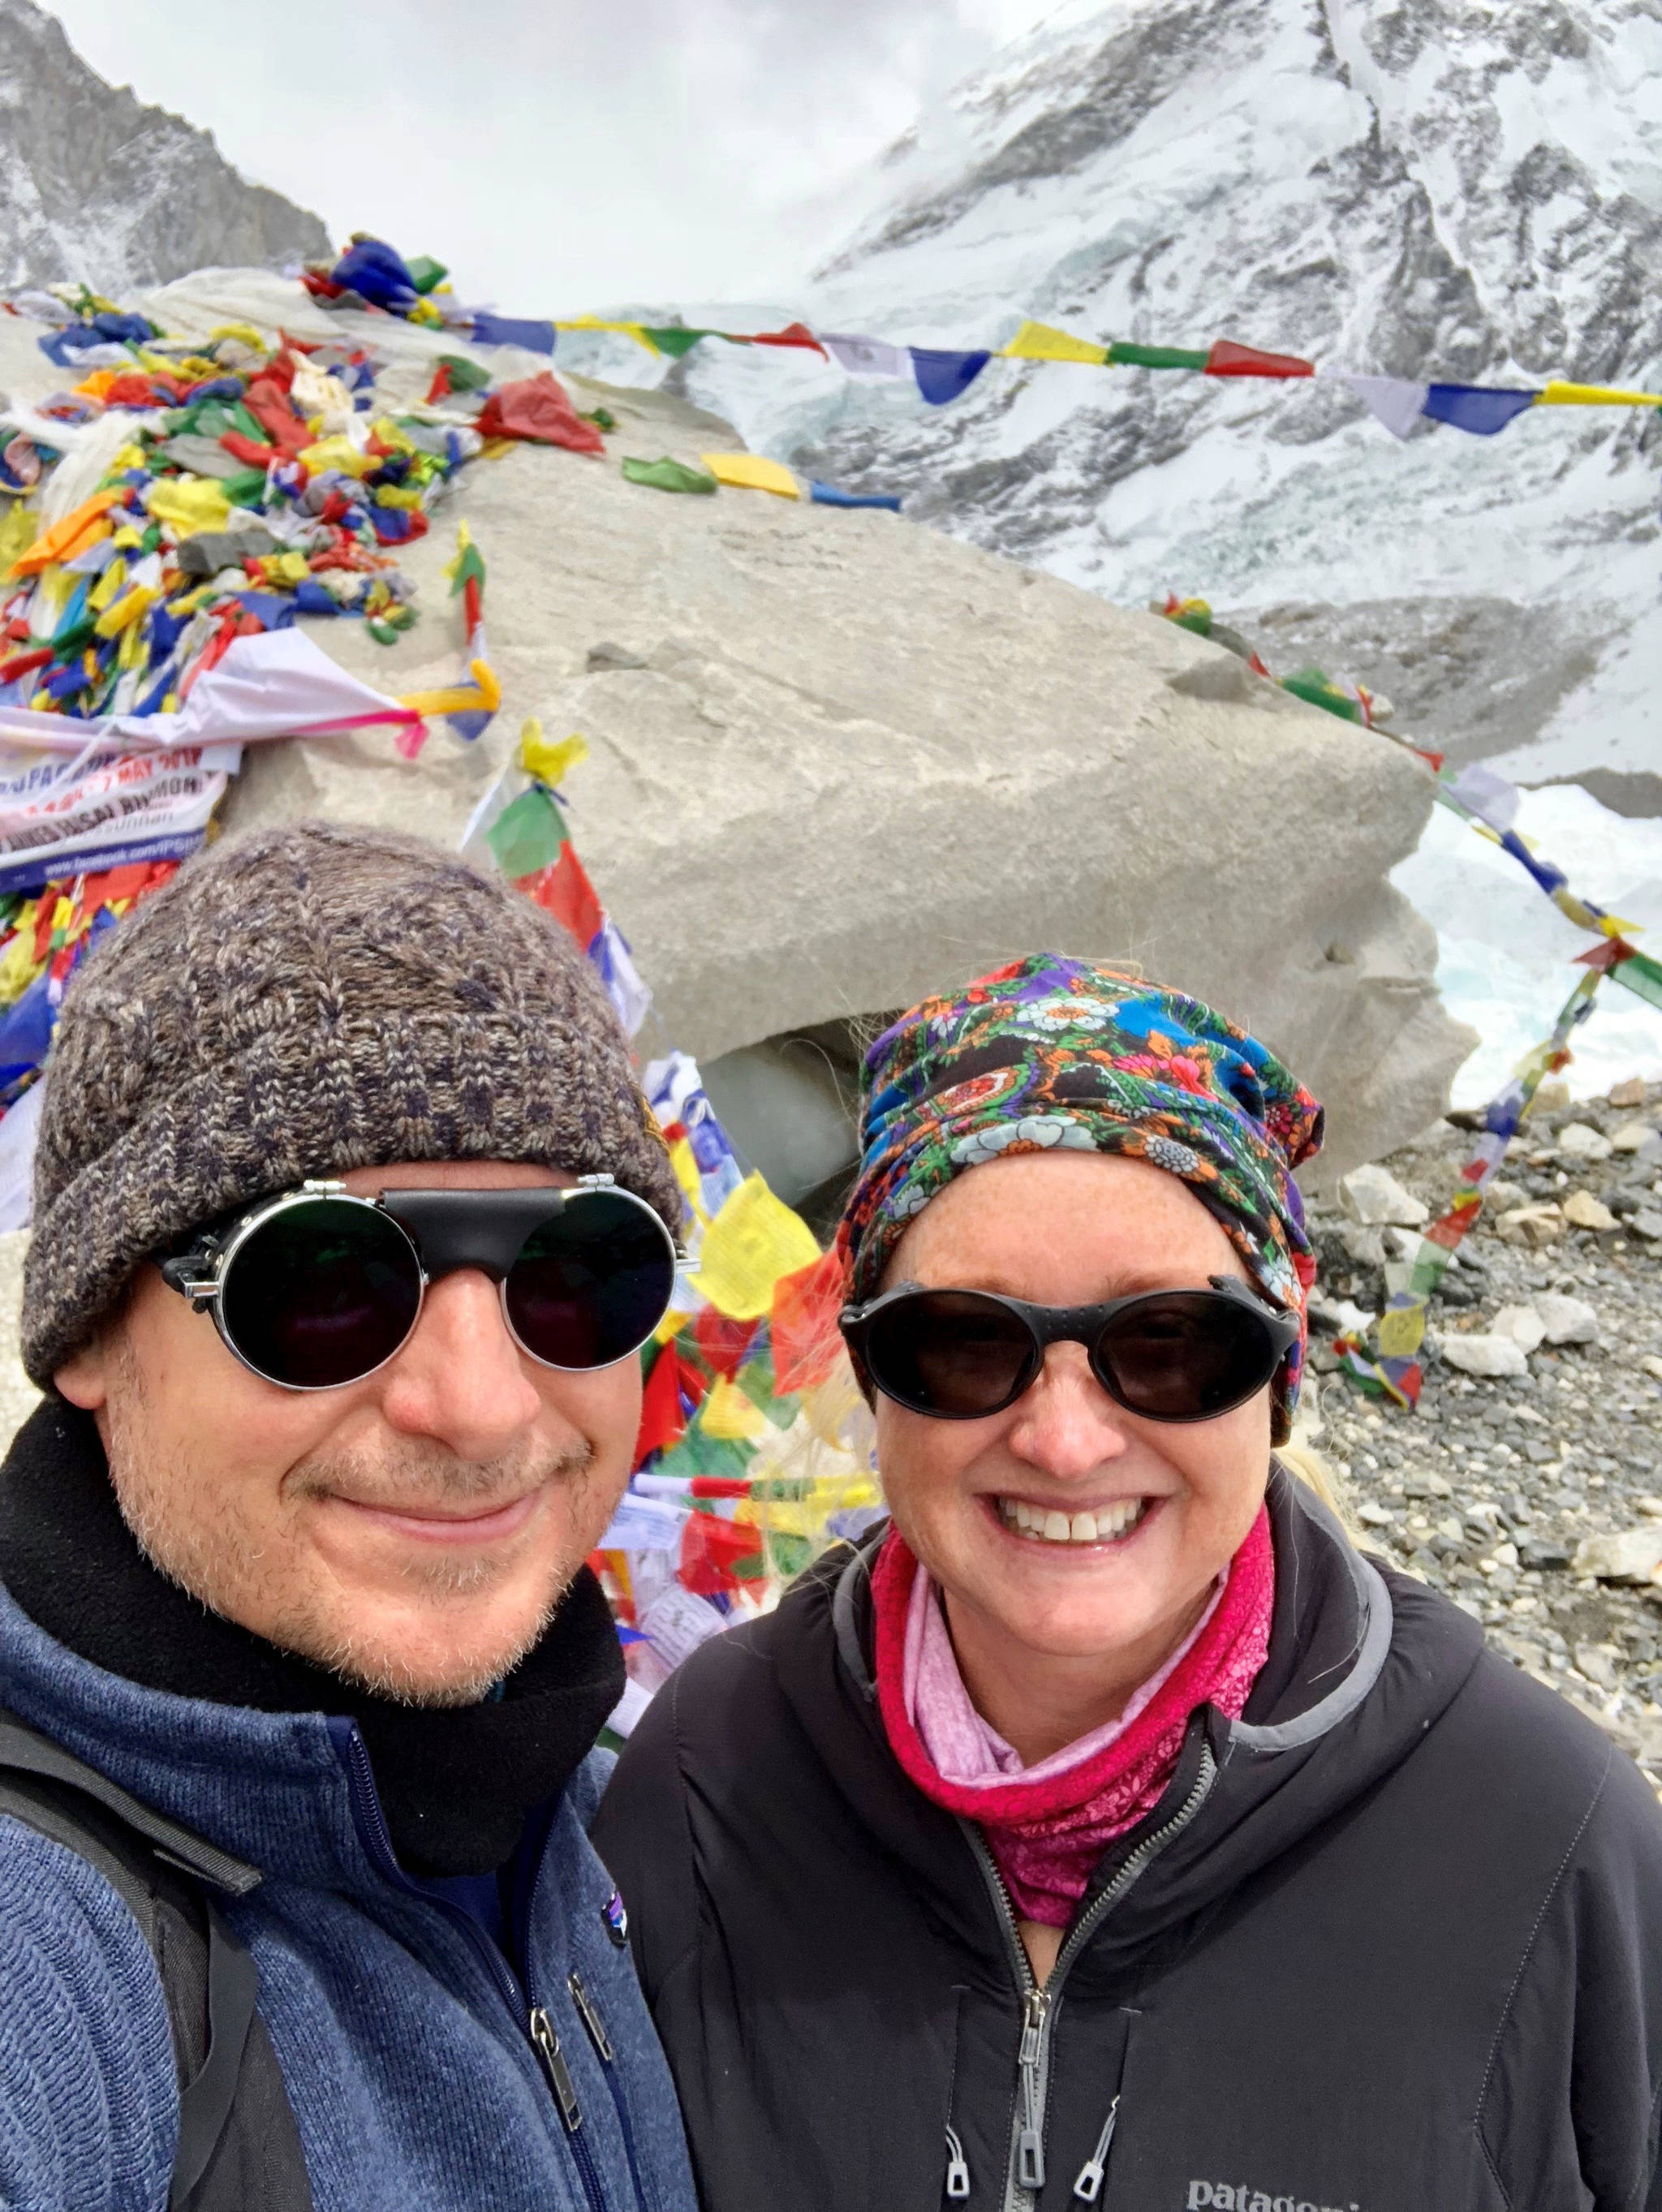 Dr. Edson Knapp and Renda Knapp on a visit to Nepal in April 2018. (Photo provided)